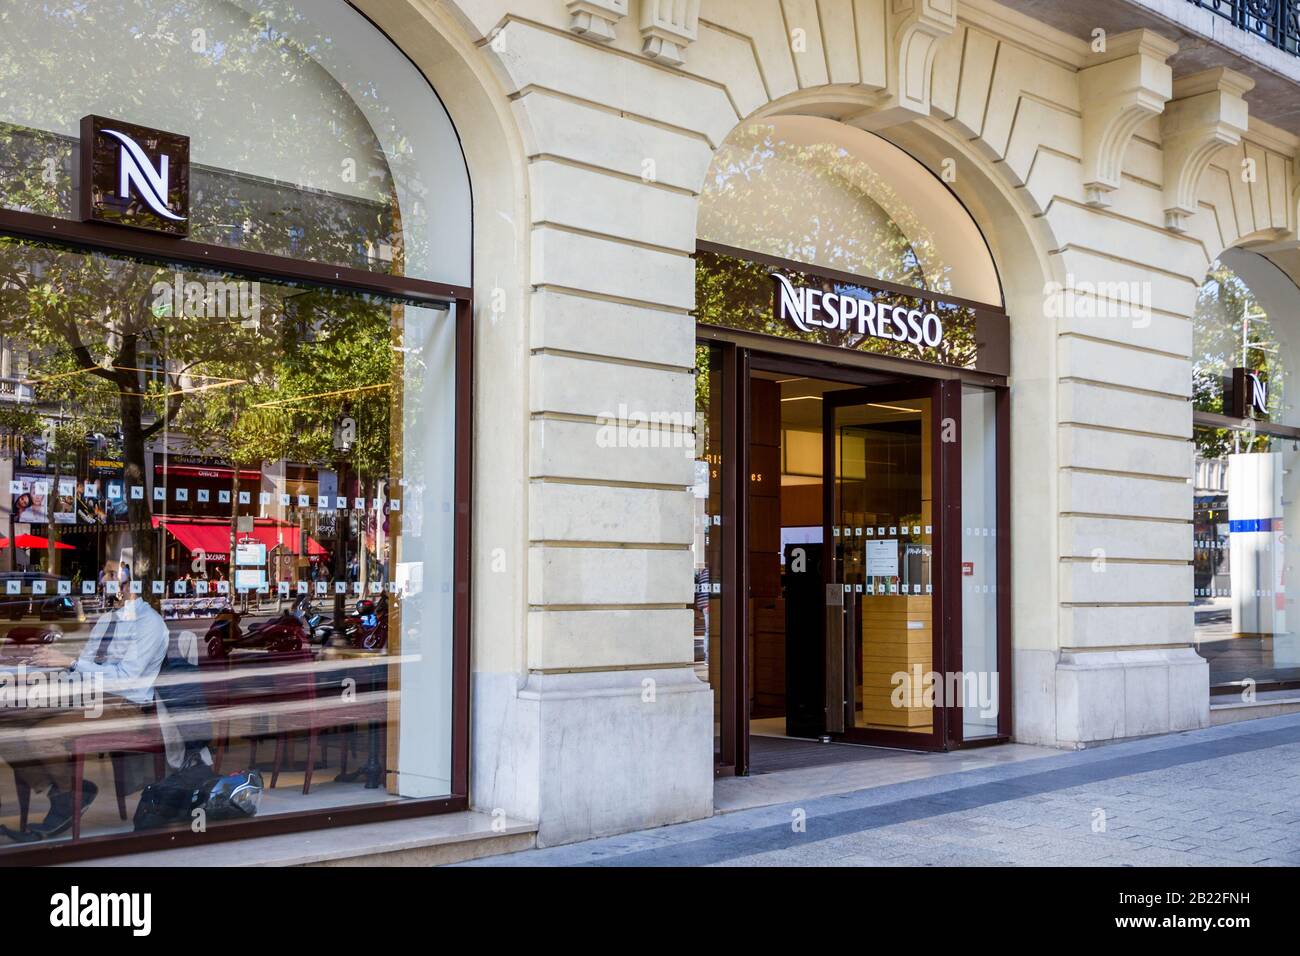 Paris/France - September 10, 2019 : The Nespresso coffee store on Champs- Elysees avenue Stock Photo - Alamy